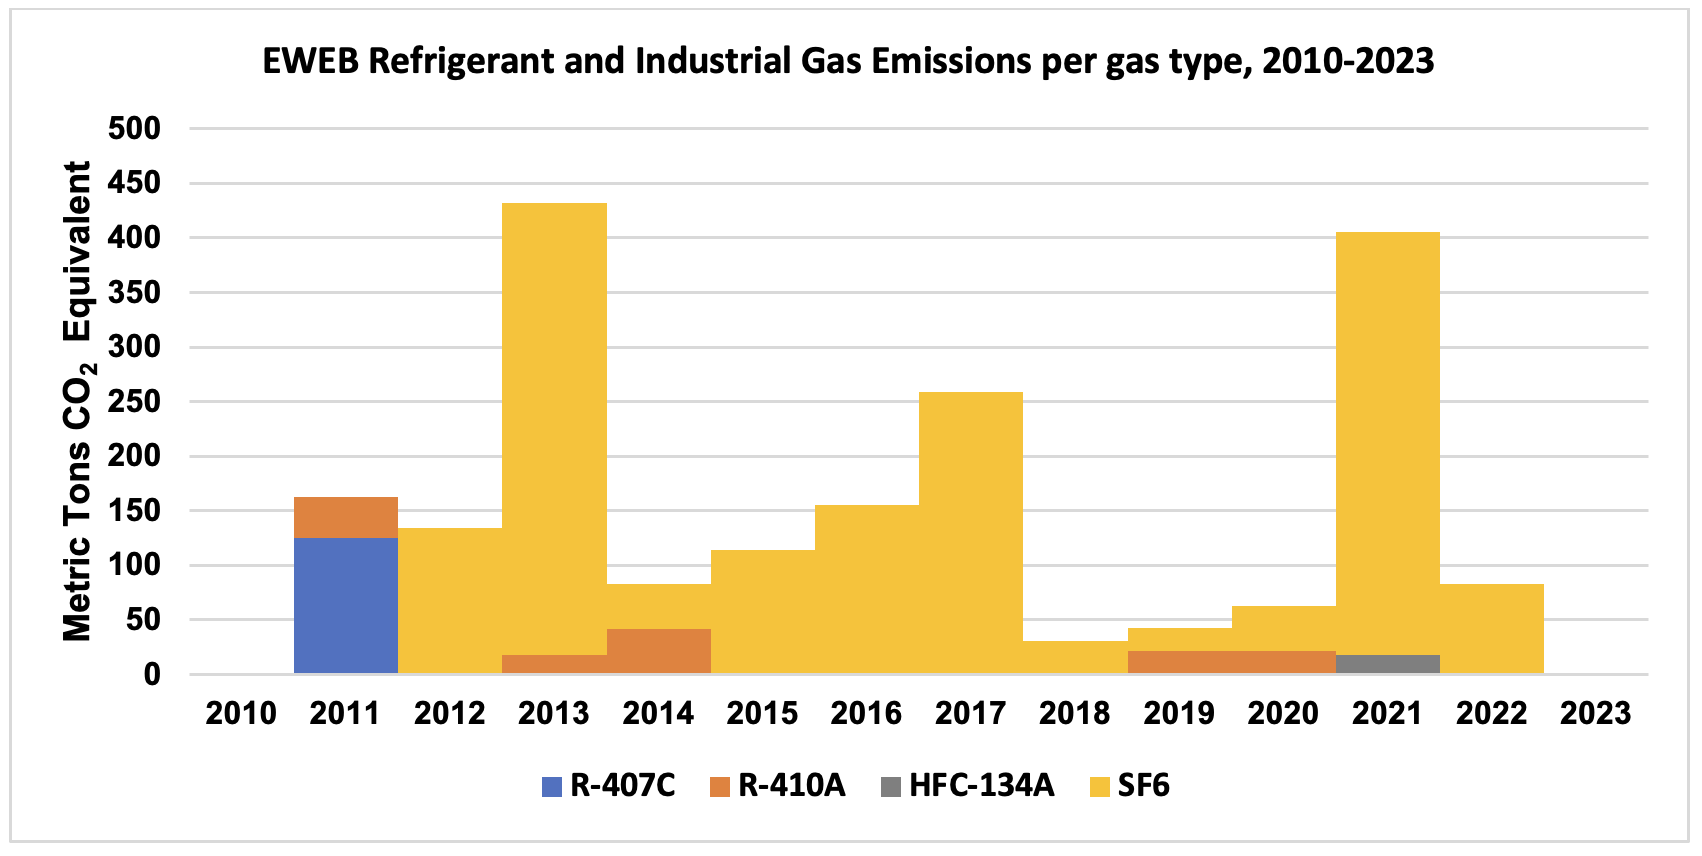 Graph of EWEB Refrigerant and Industrial Gas Emissions by Gas Type (MT CO2e), 2010-2023